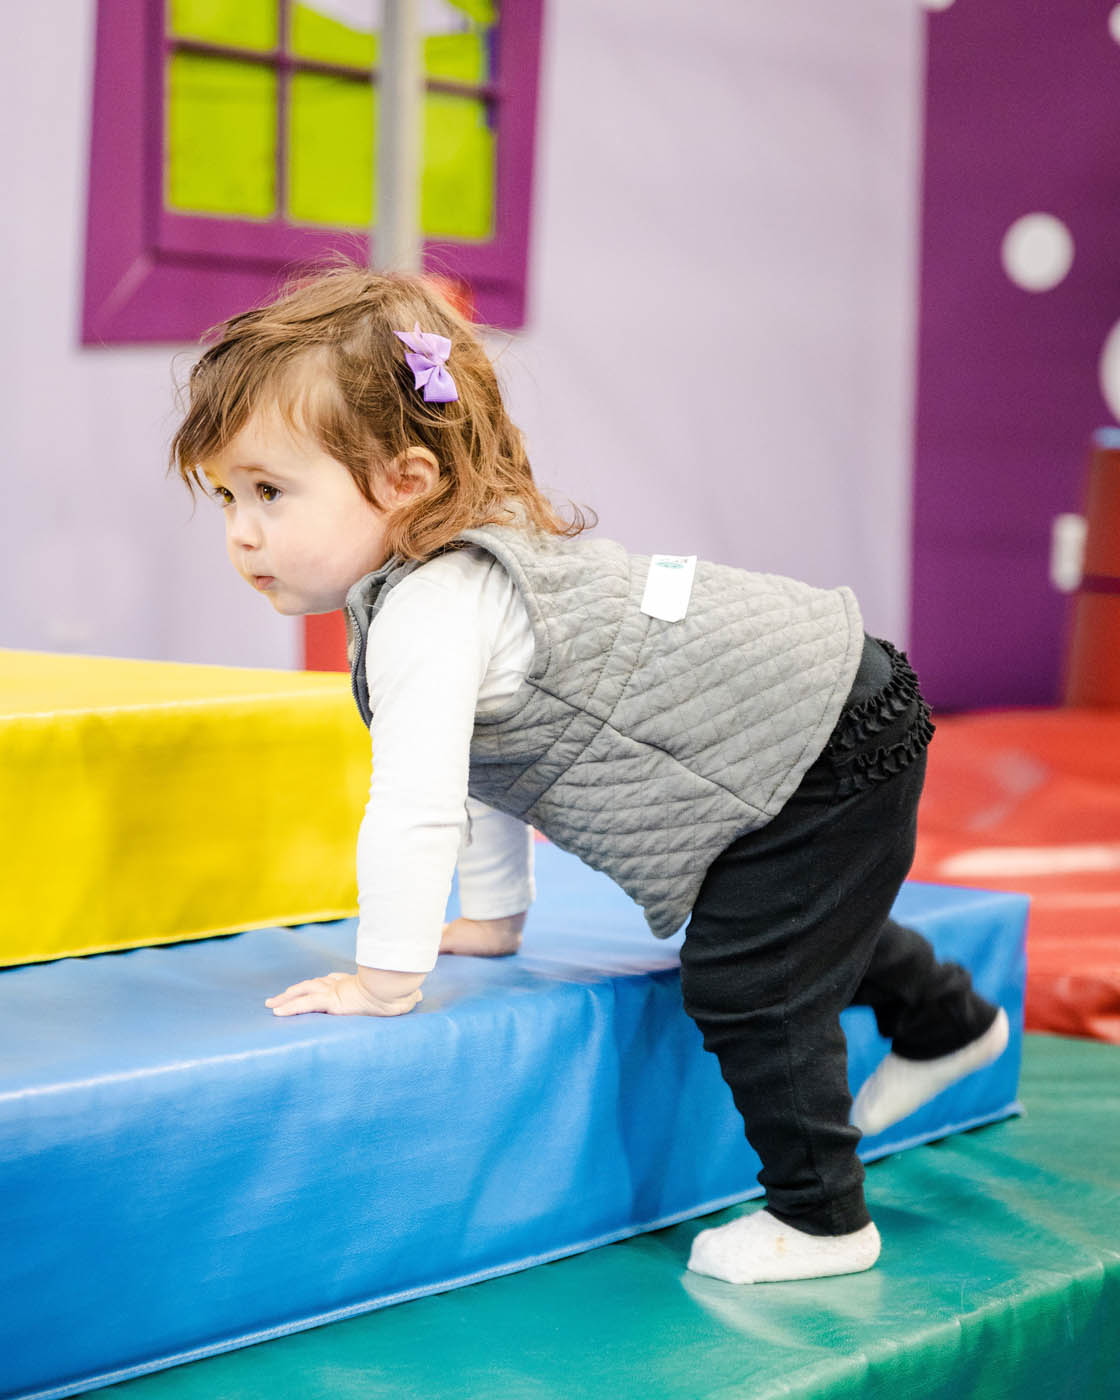 A little girl climbing on soft tumbling equipment for toddlers at Romp n' Roll.